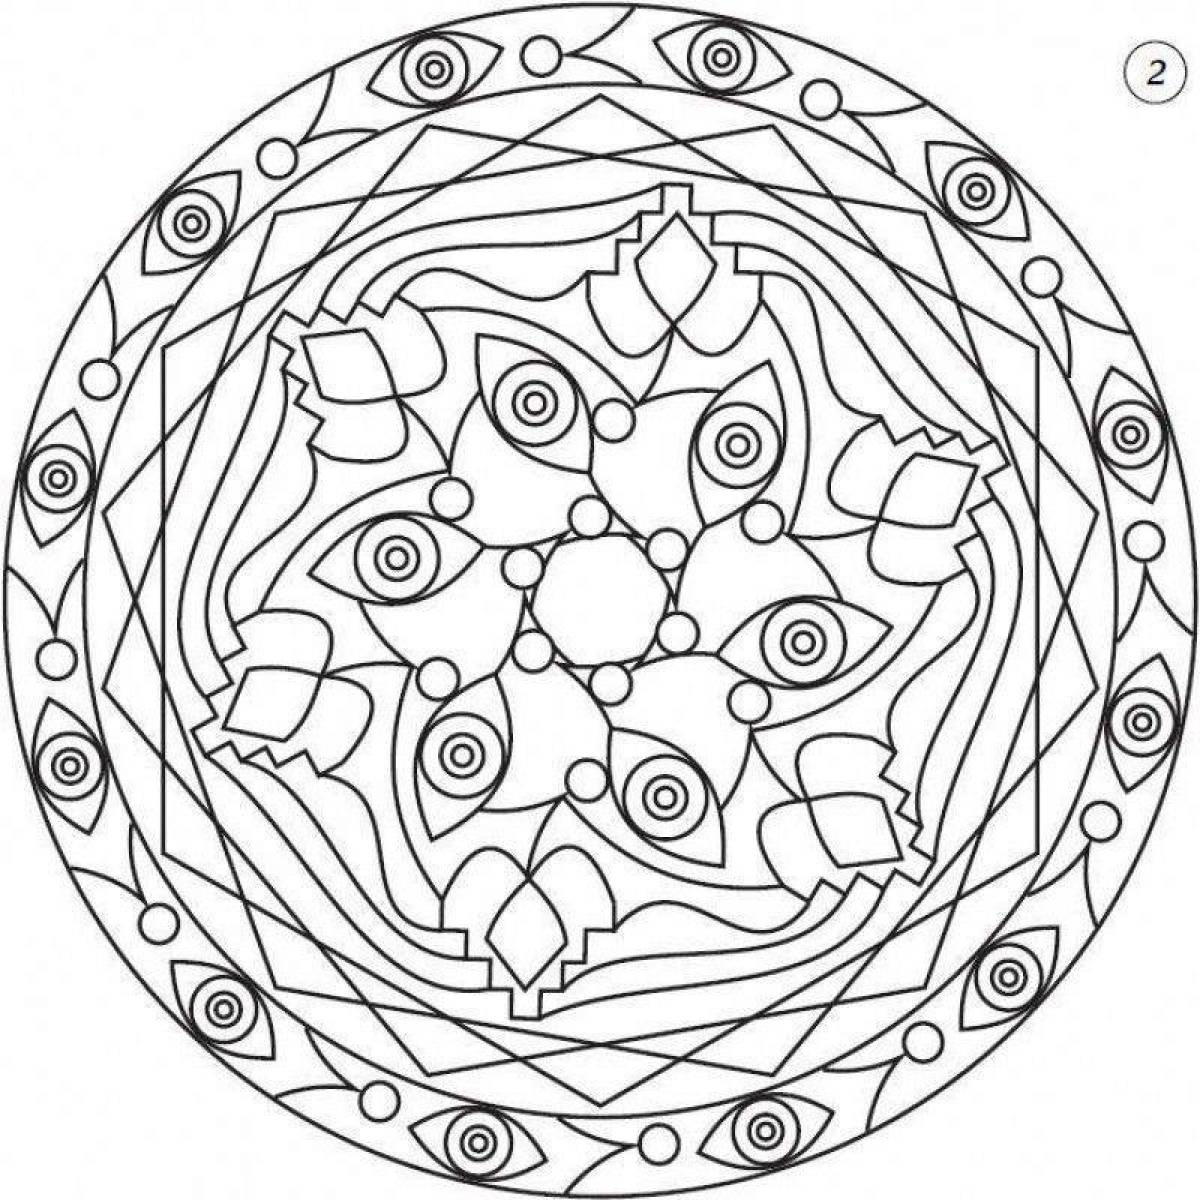 Serendipitous coloring page of a mandala with meaning